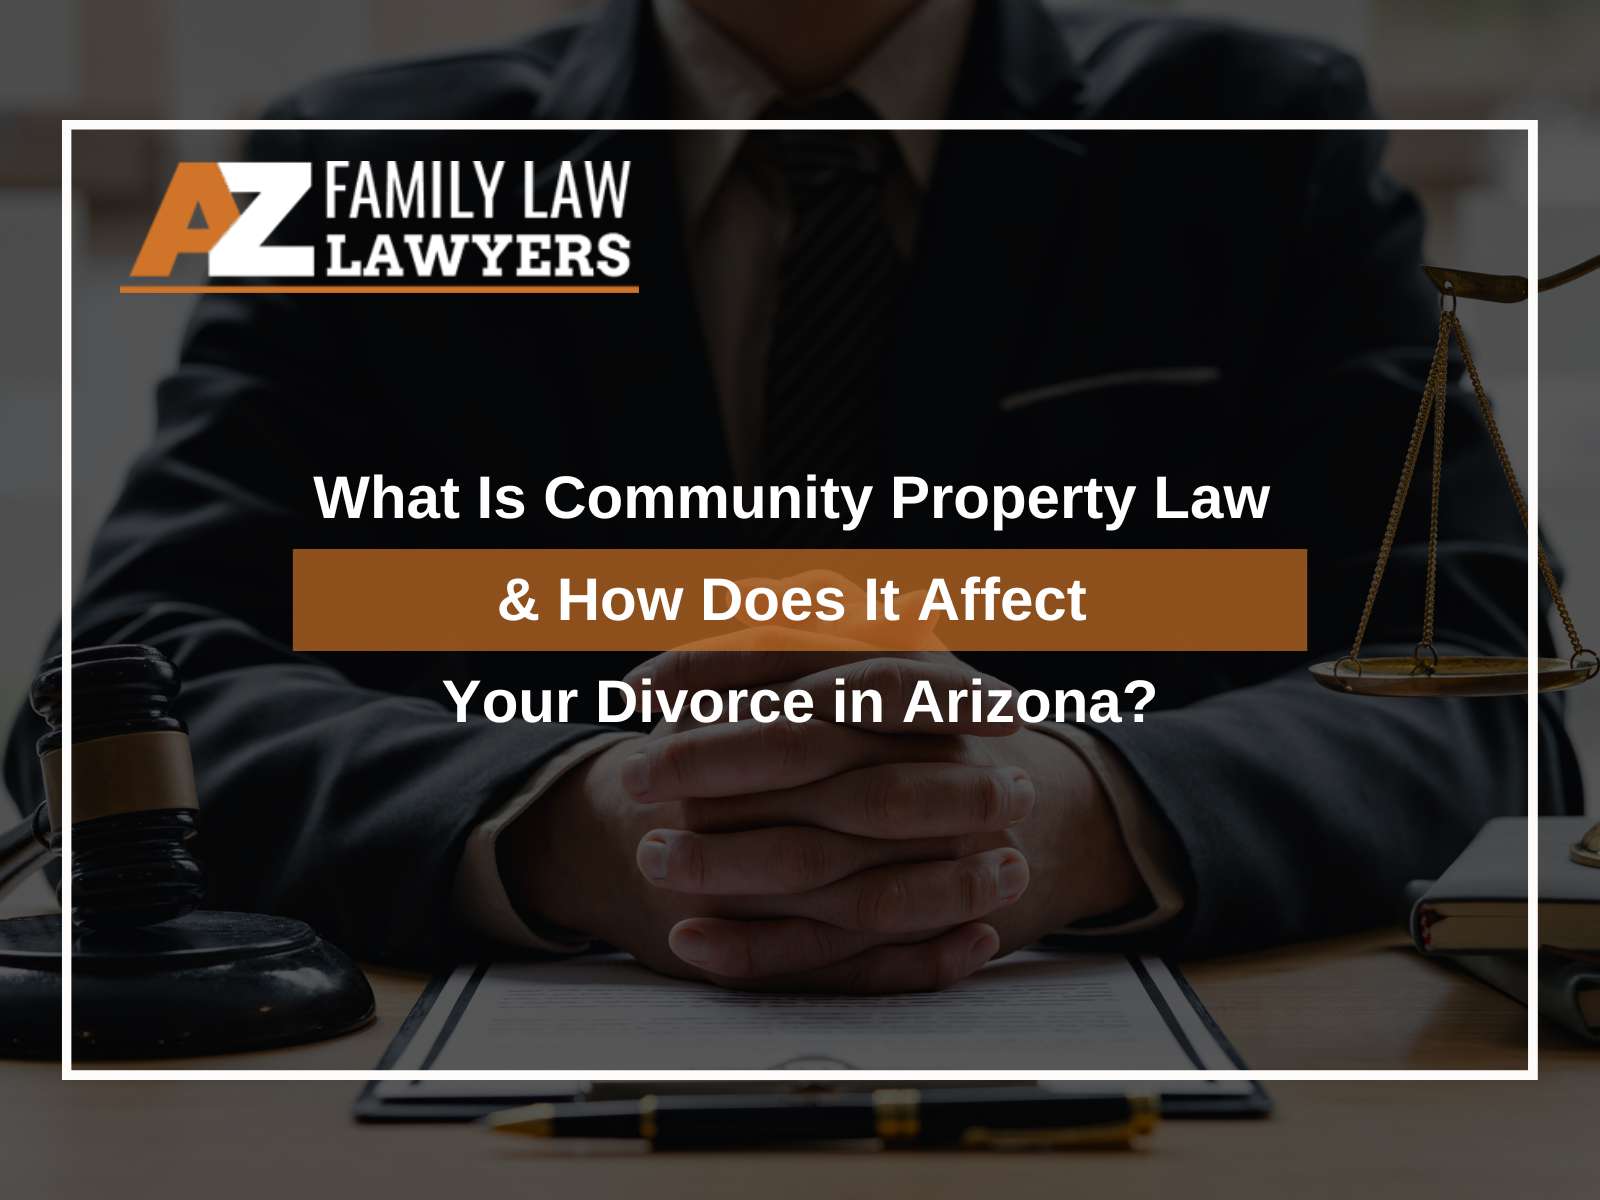 Community Property Law & How Affects Your Arizona Divorce